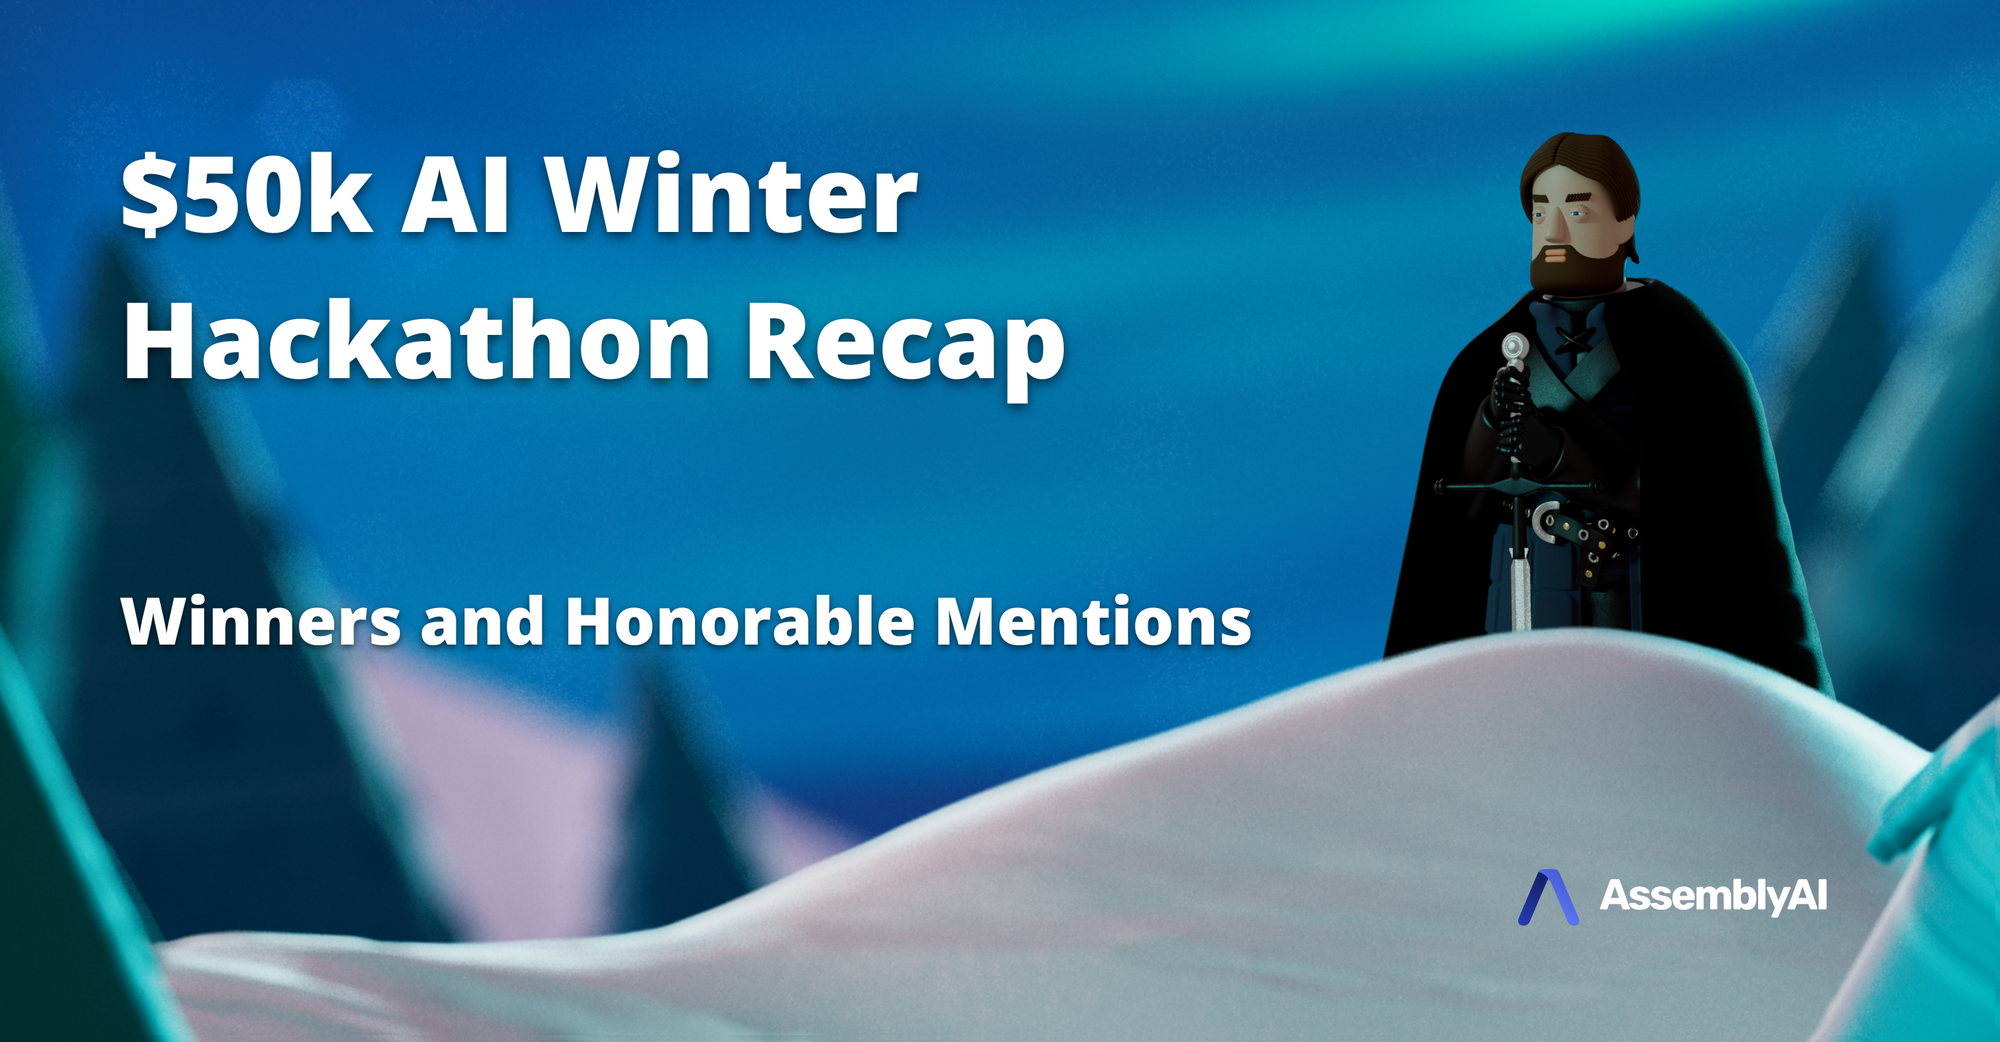 Winners and Honorable Mentions - AssemblyAI $50k Winter Hackathon